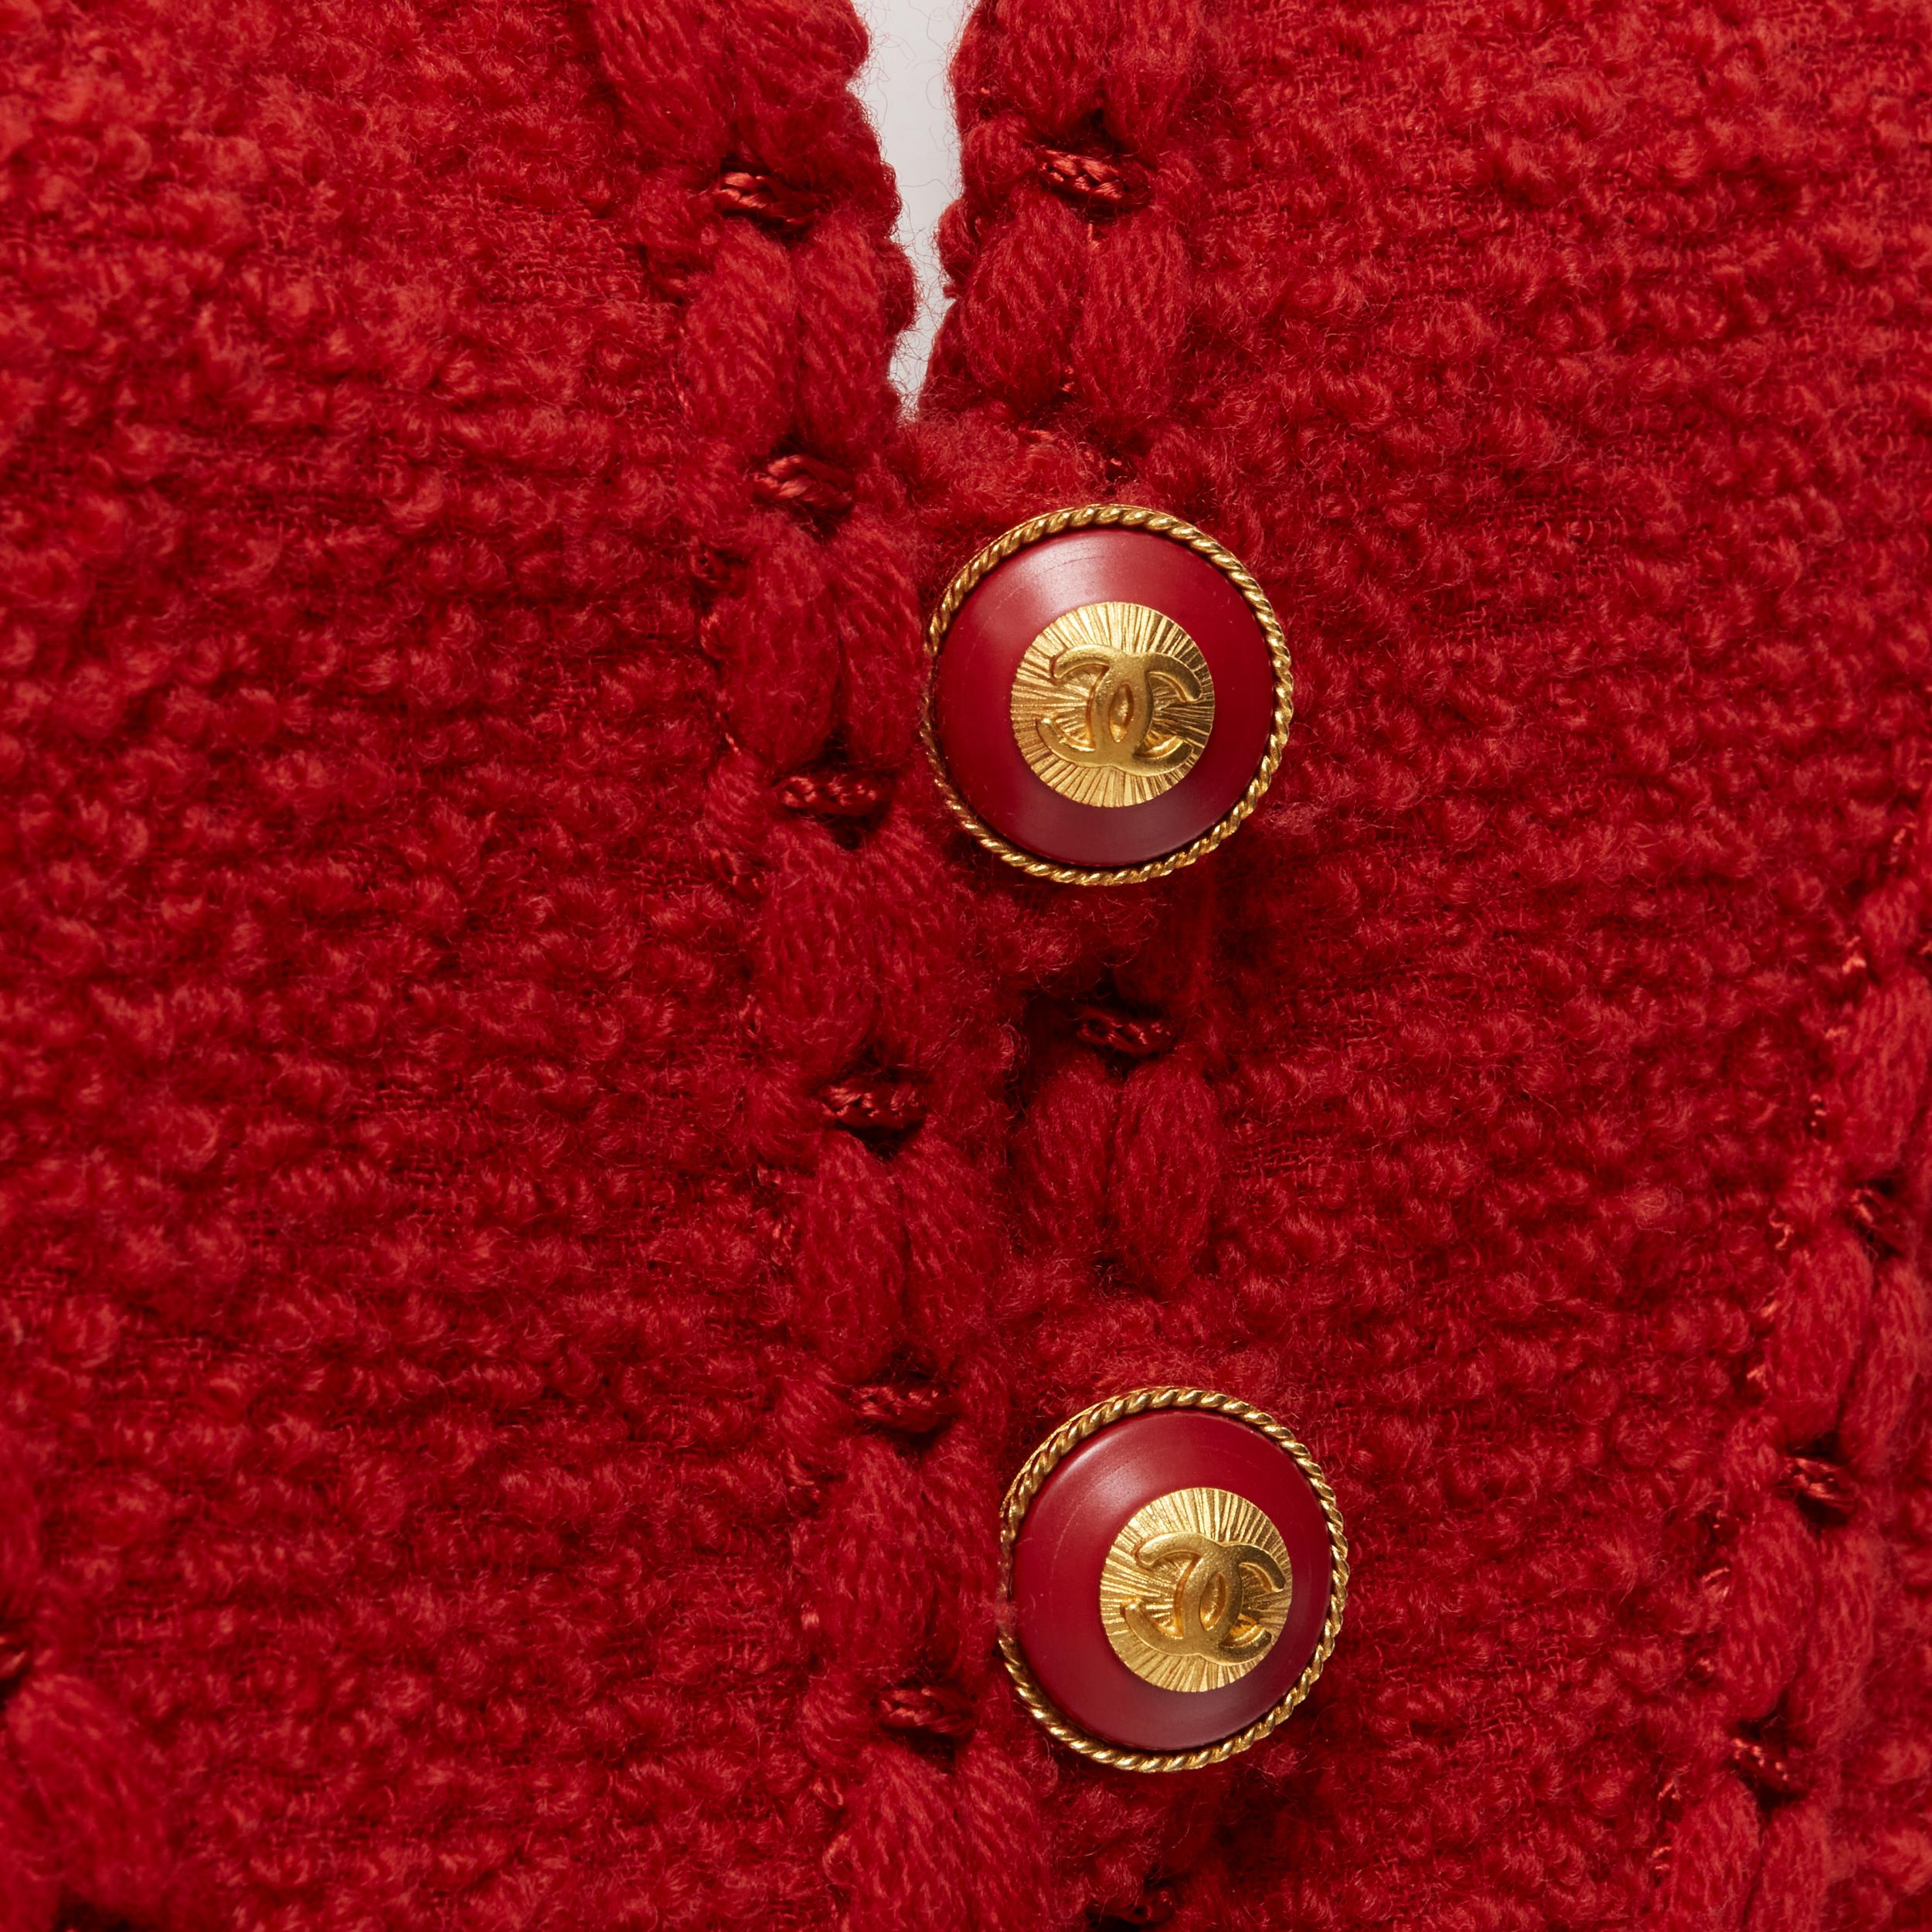 Runway CHANEL Vintage 93A red boucle tweed boned corset  jacket FR44
Brand: Chanel
Designer: Karl Lagerfeld
Collection: 93A 
Material: Wool
Color: Red
Pattern: Solid
Closure: Button
Extra Detail: Red boucle tweed. Notched collar. Shoulder padded.